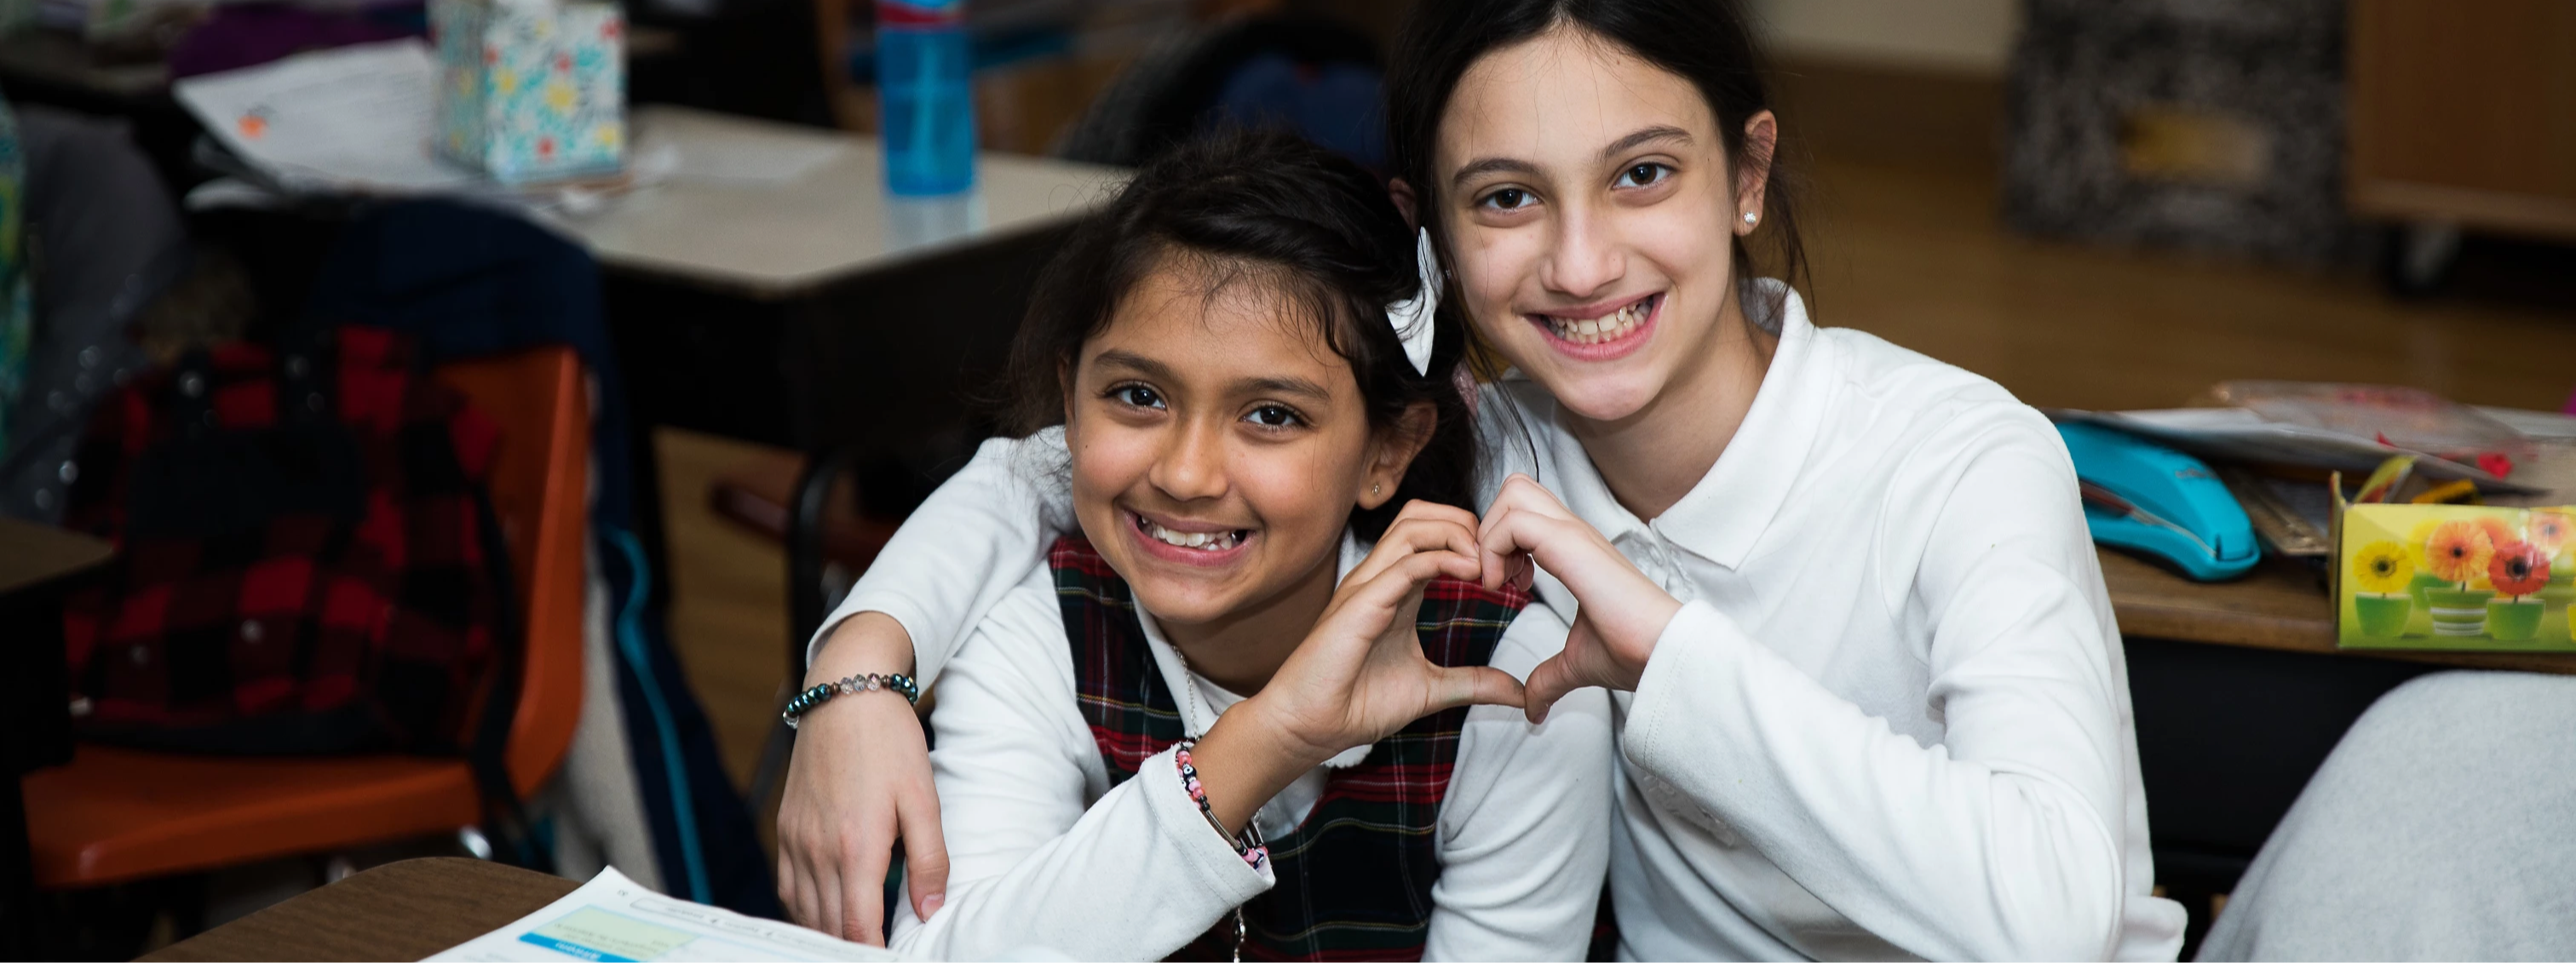 Two students making a heart shape with their hands